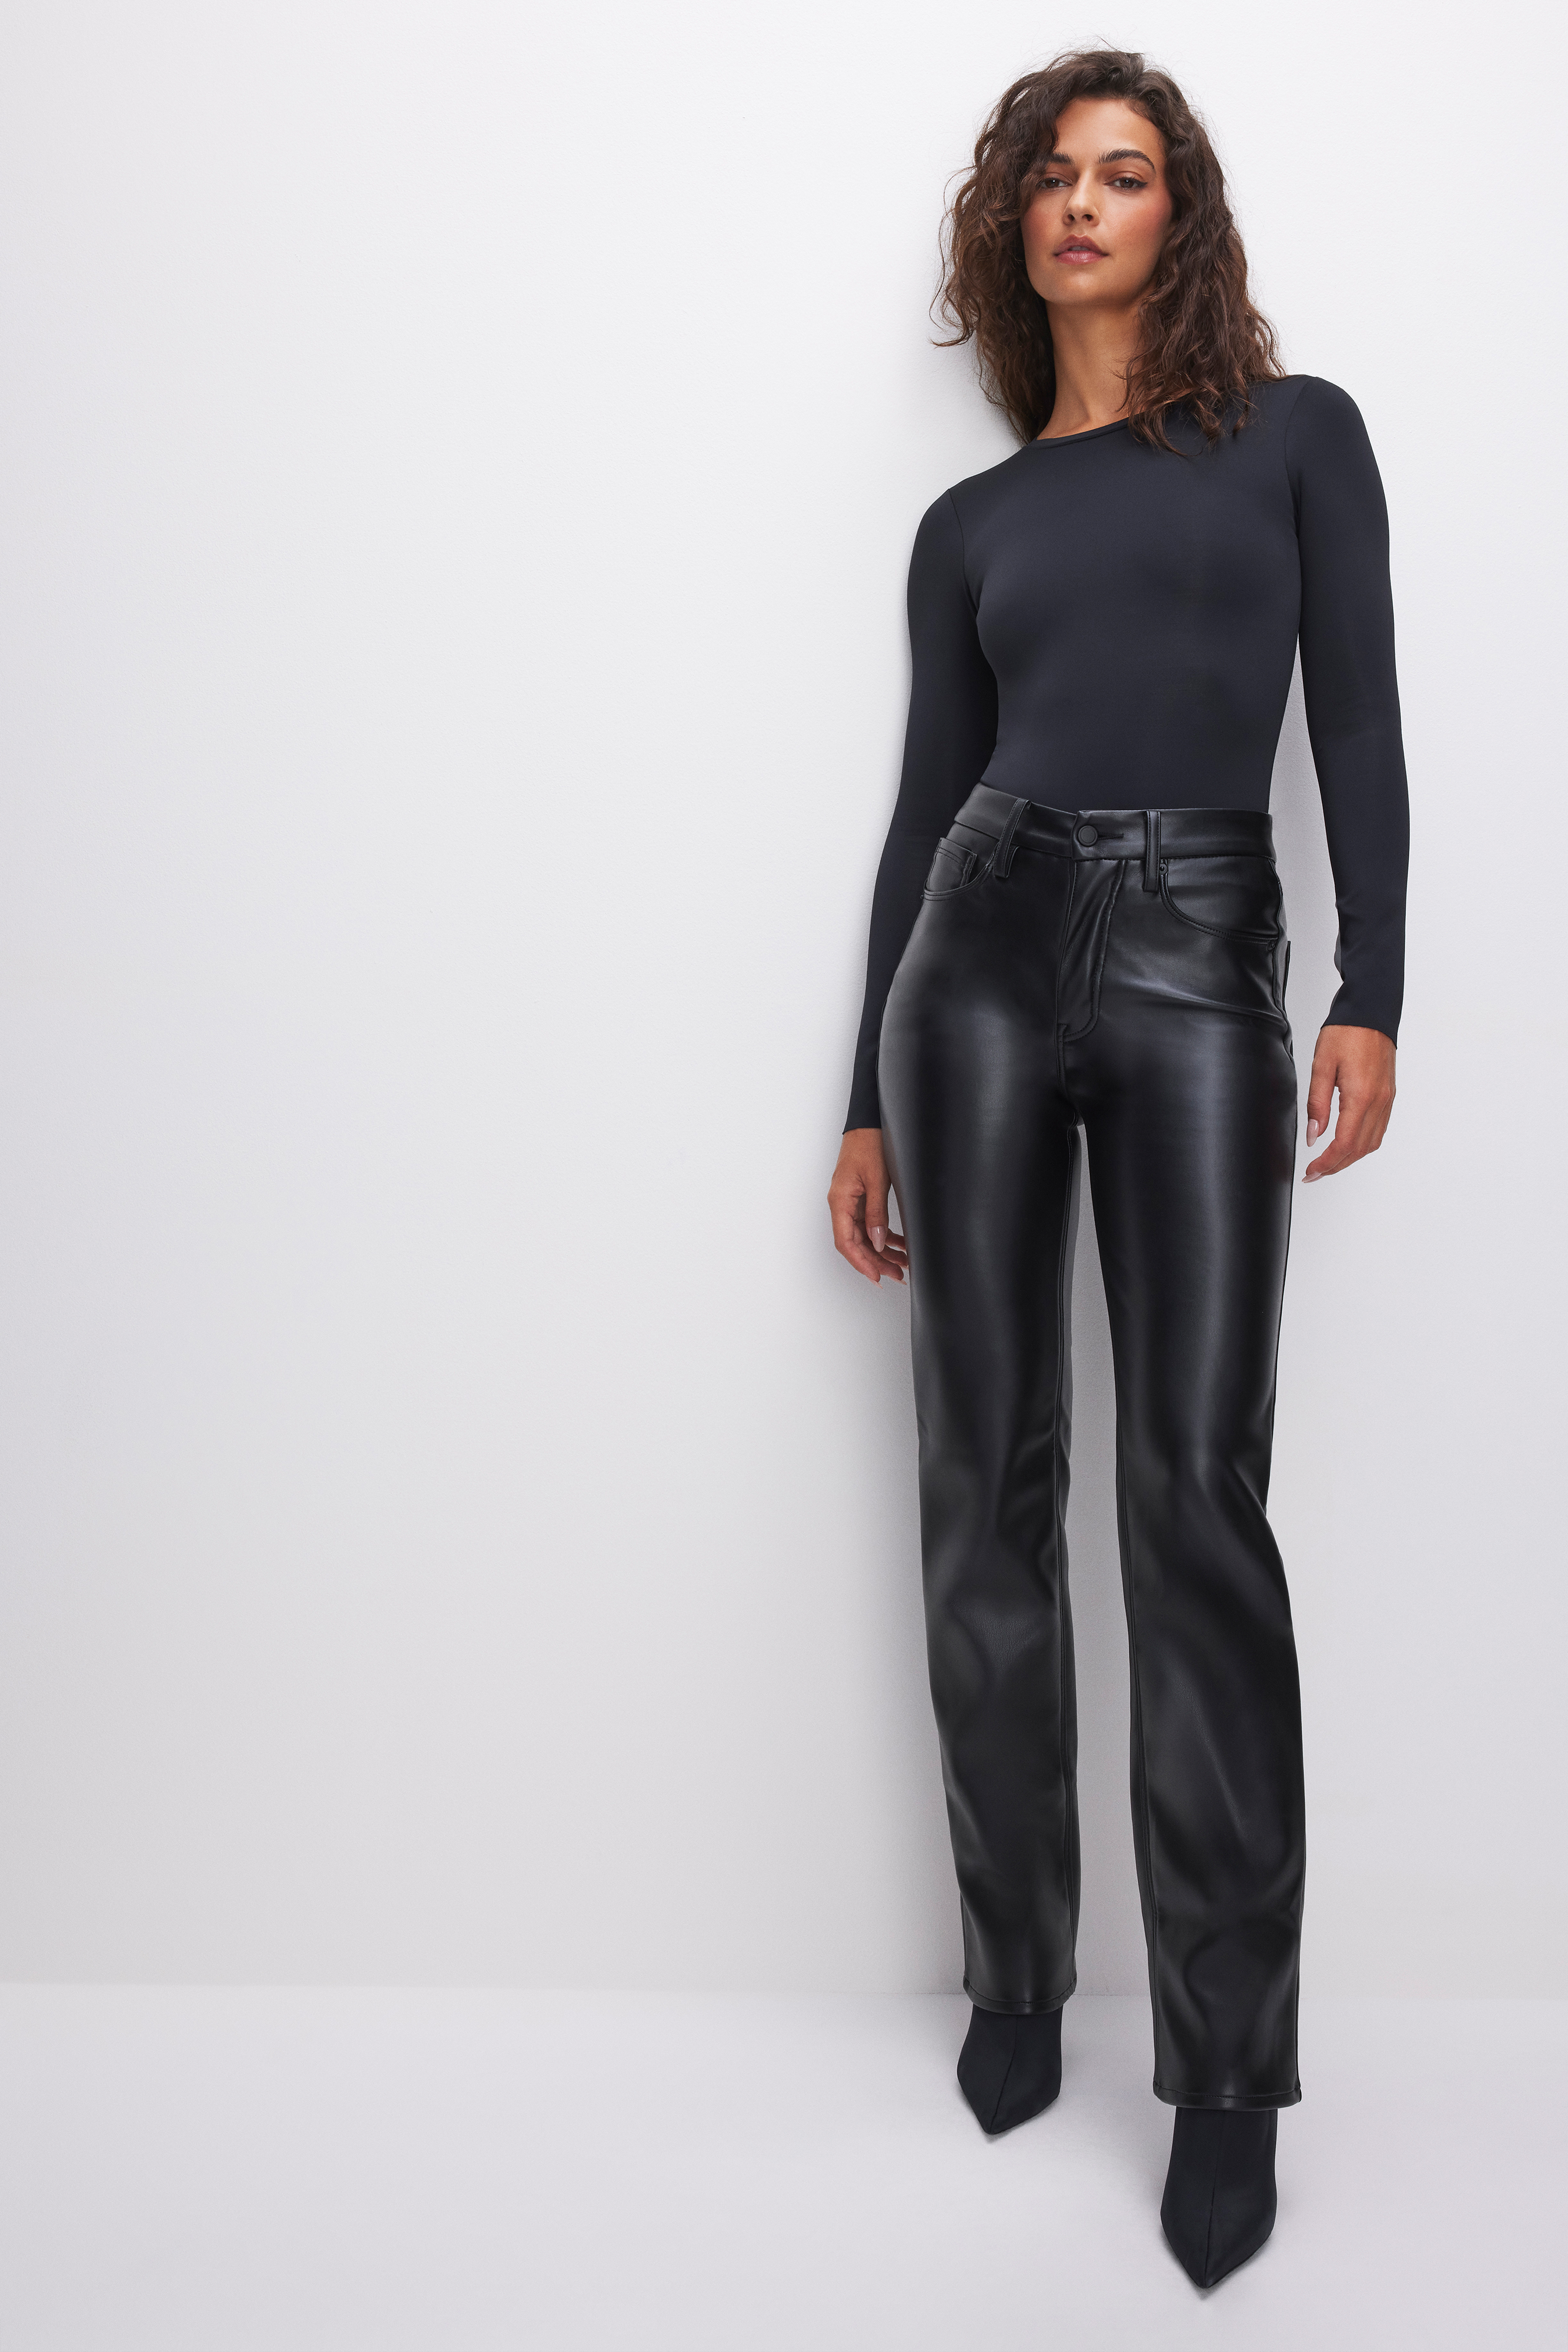 Leather Pants 🔥 These leather pants adds a sexy and chic look to any  outfit, it gives a slim fit hold which perfectly outlines all yo